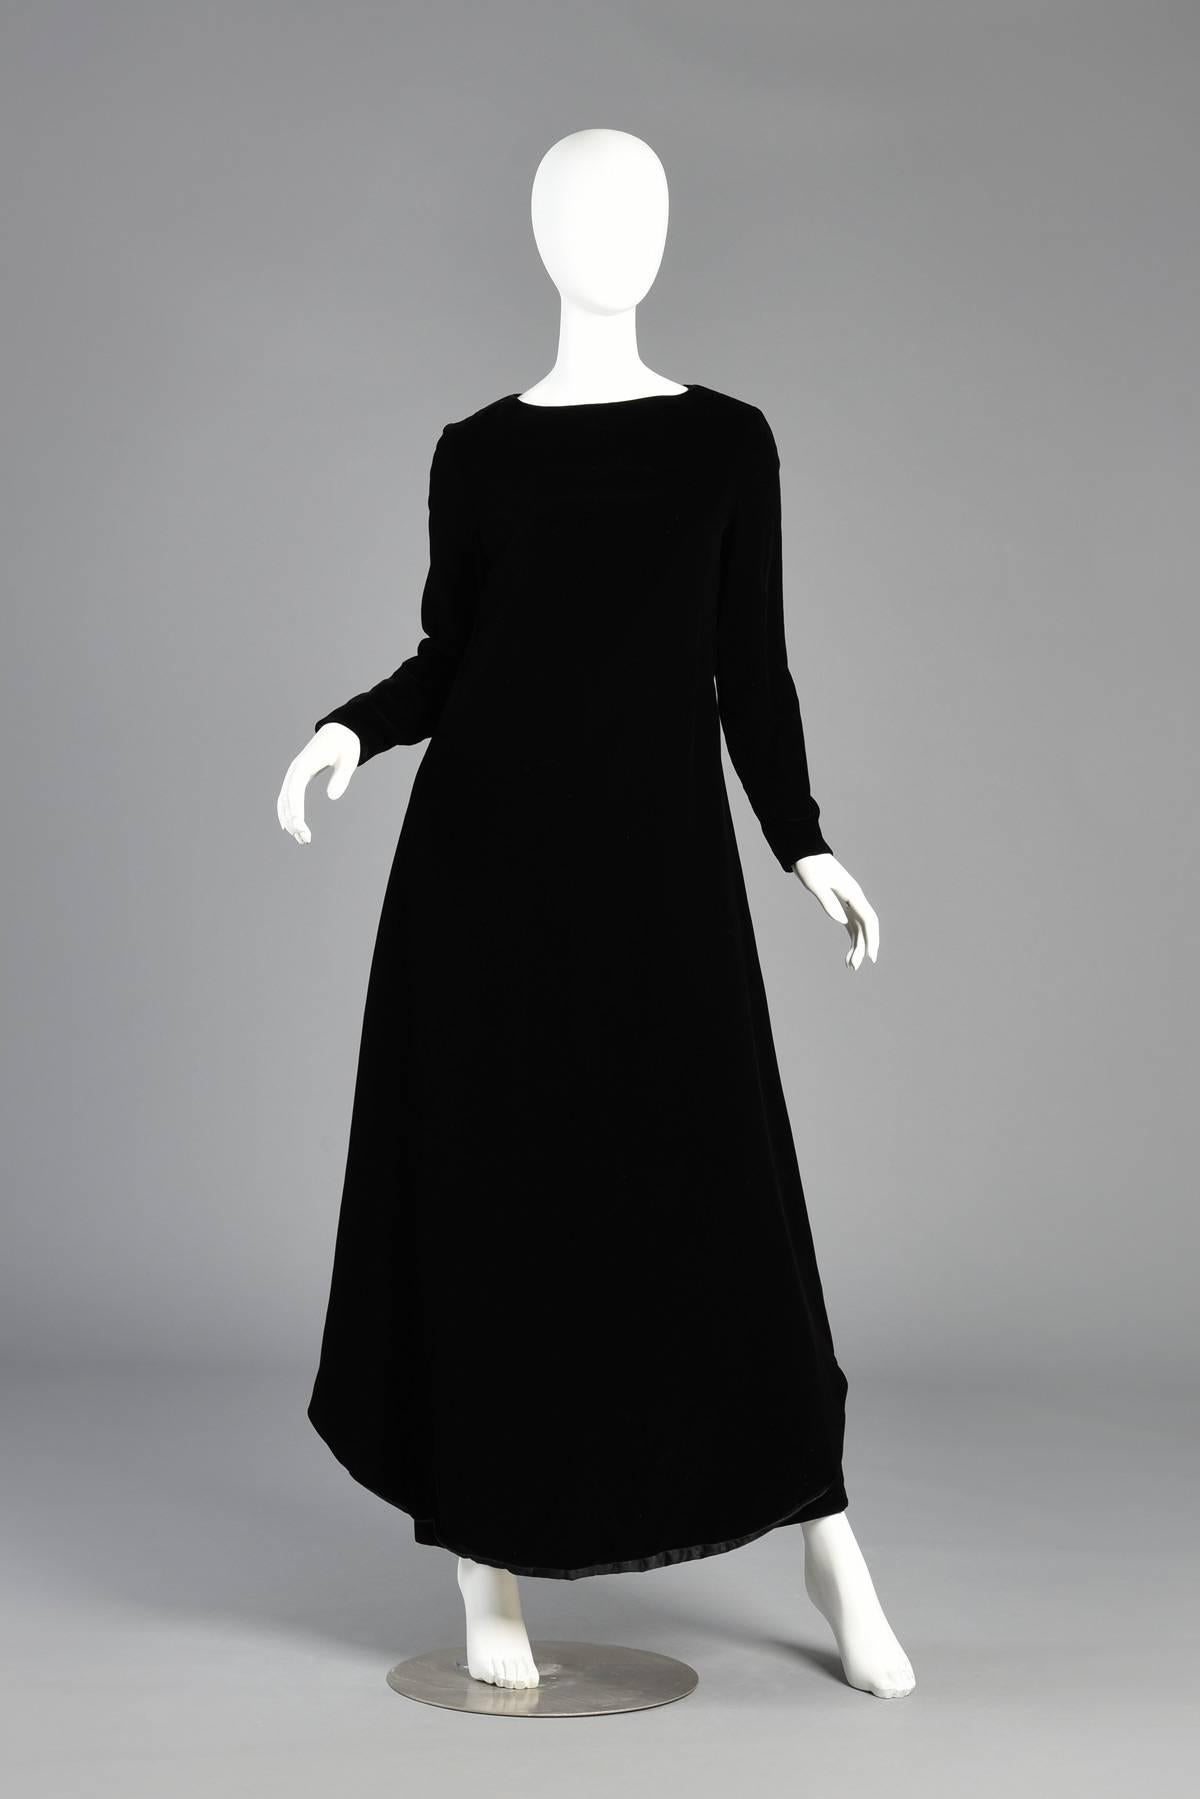 Pierre Cardin Space Age Velvet Apron Paneled Gown In Excellent Condition For Sale In Yucca Valley, CA